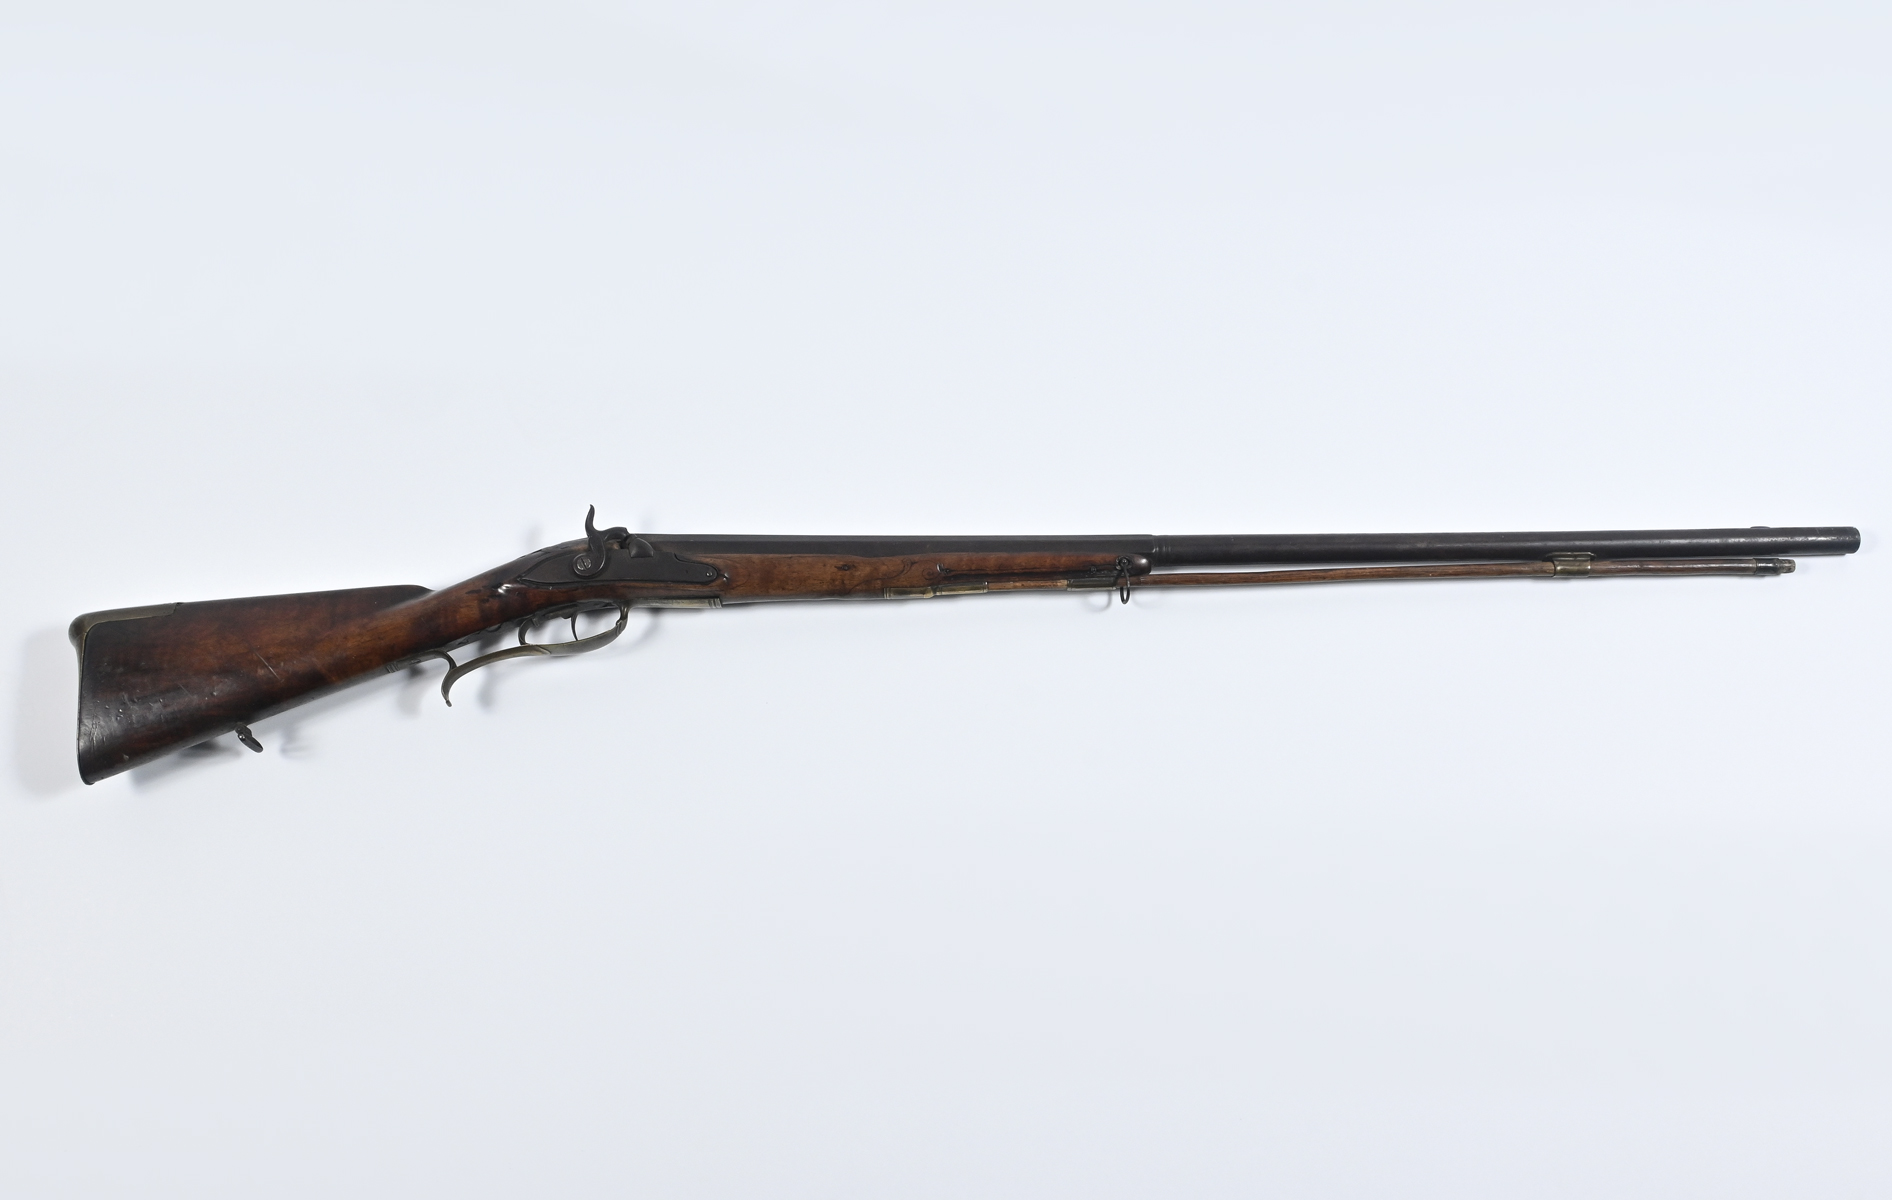 OLD BLACK POWDER PERCUSSION RIFLE: Finely